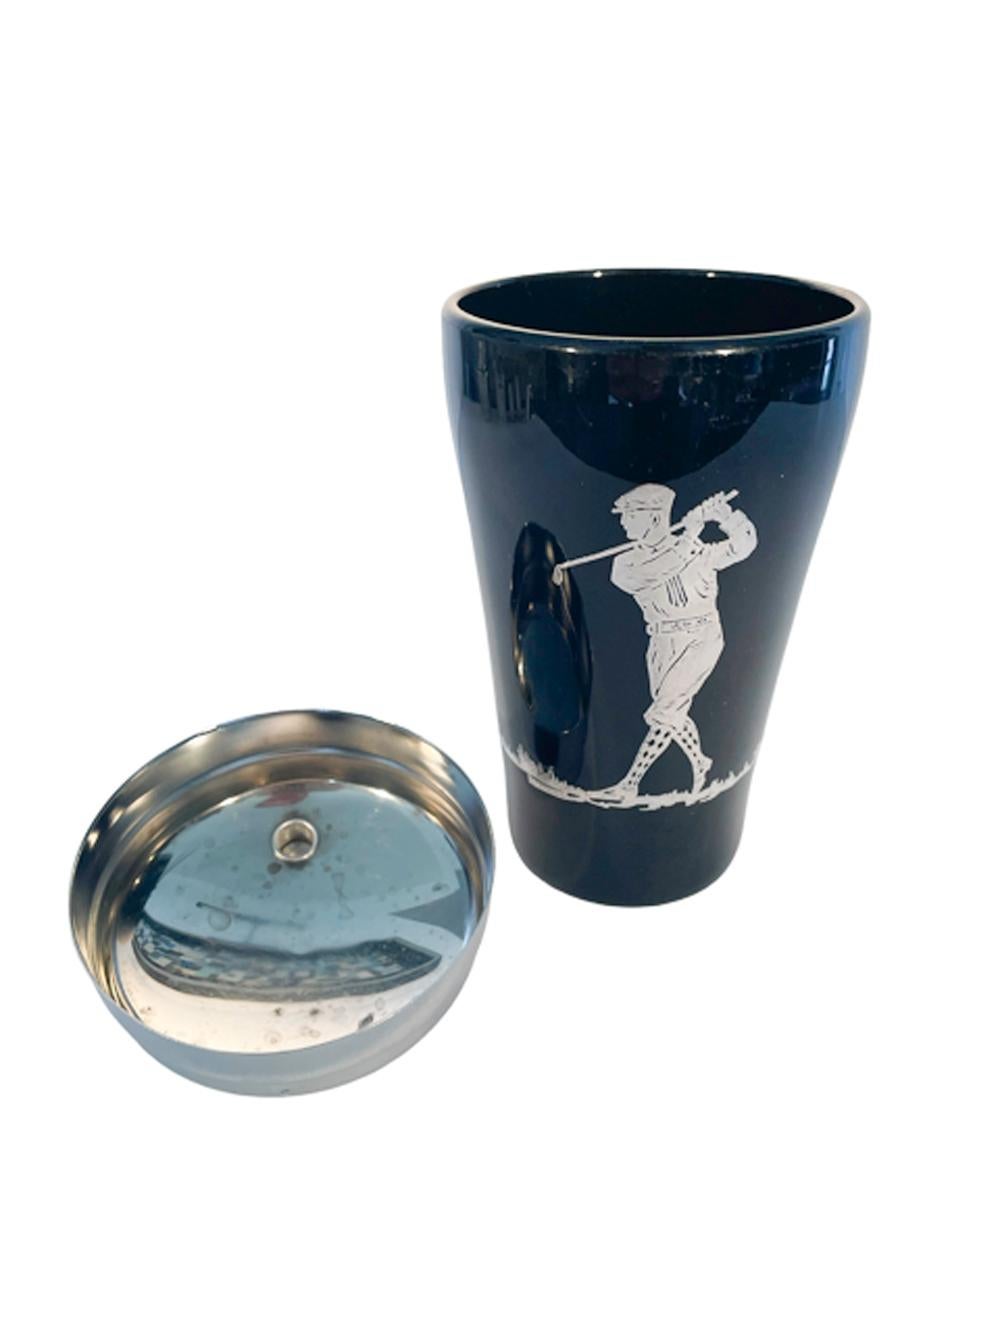 American Art Deco Silver Overlay Black Glass with a Golfer and a Chrome Lid For Sale